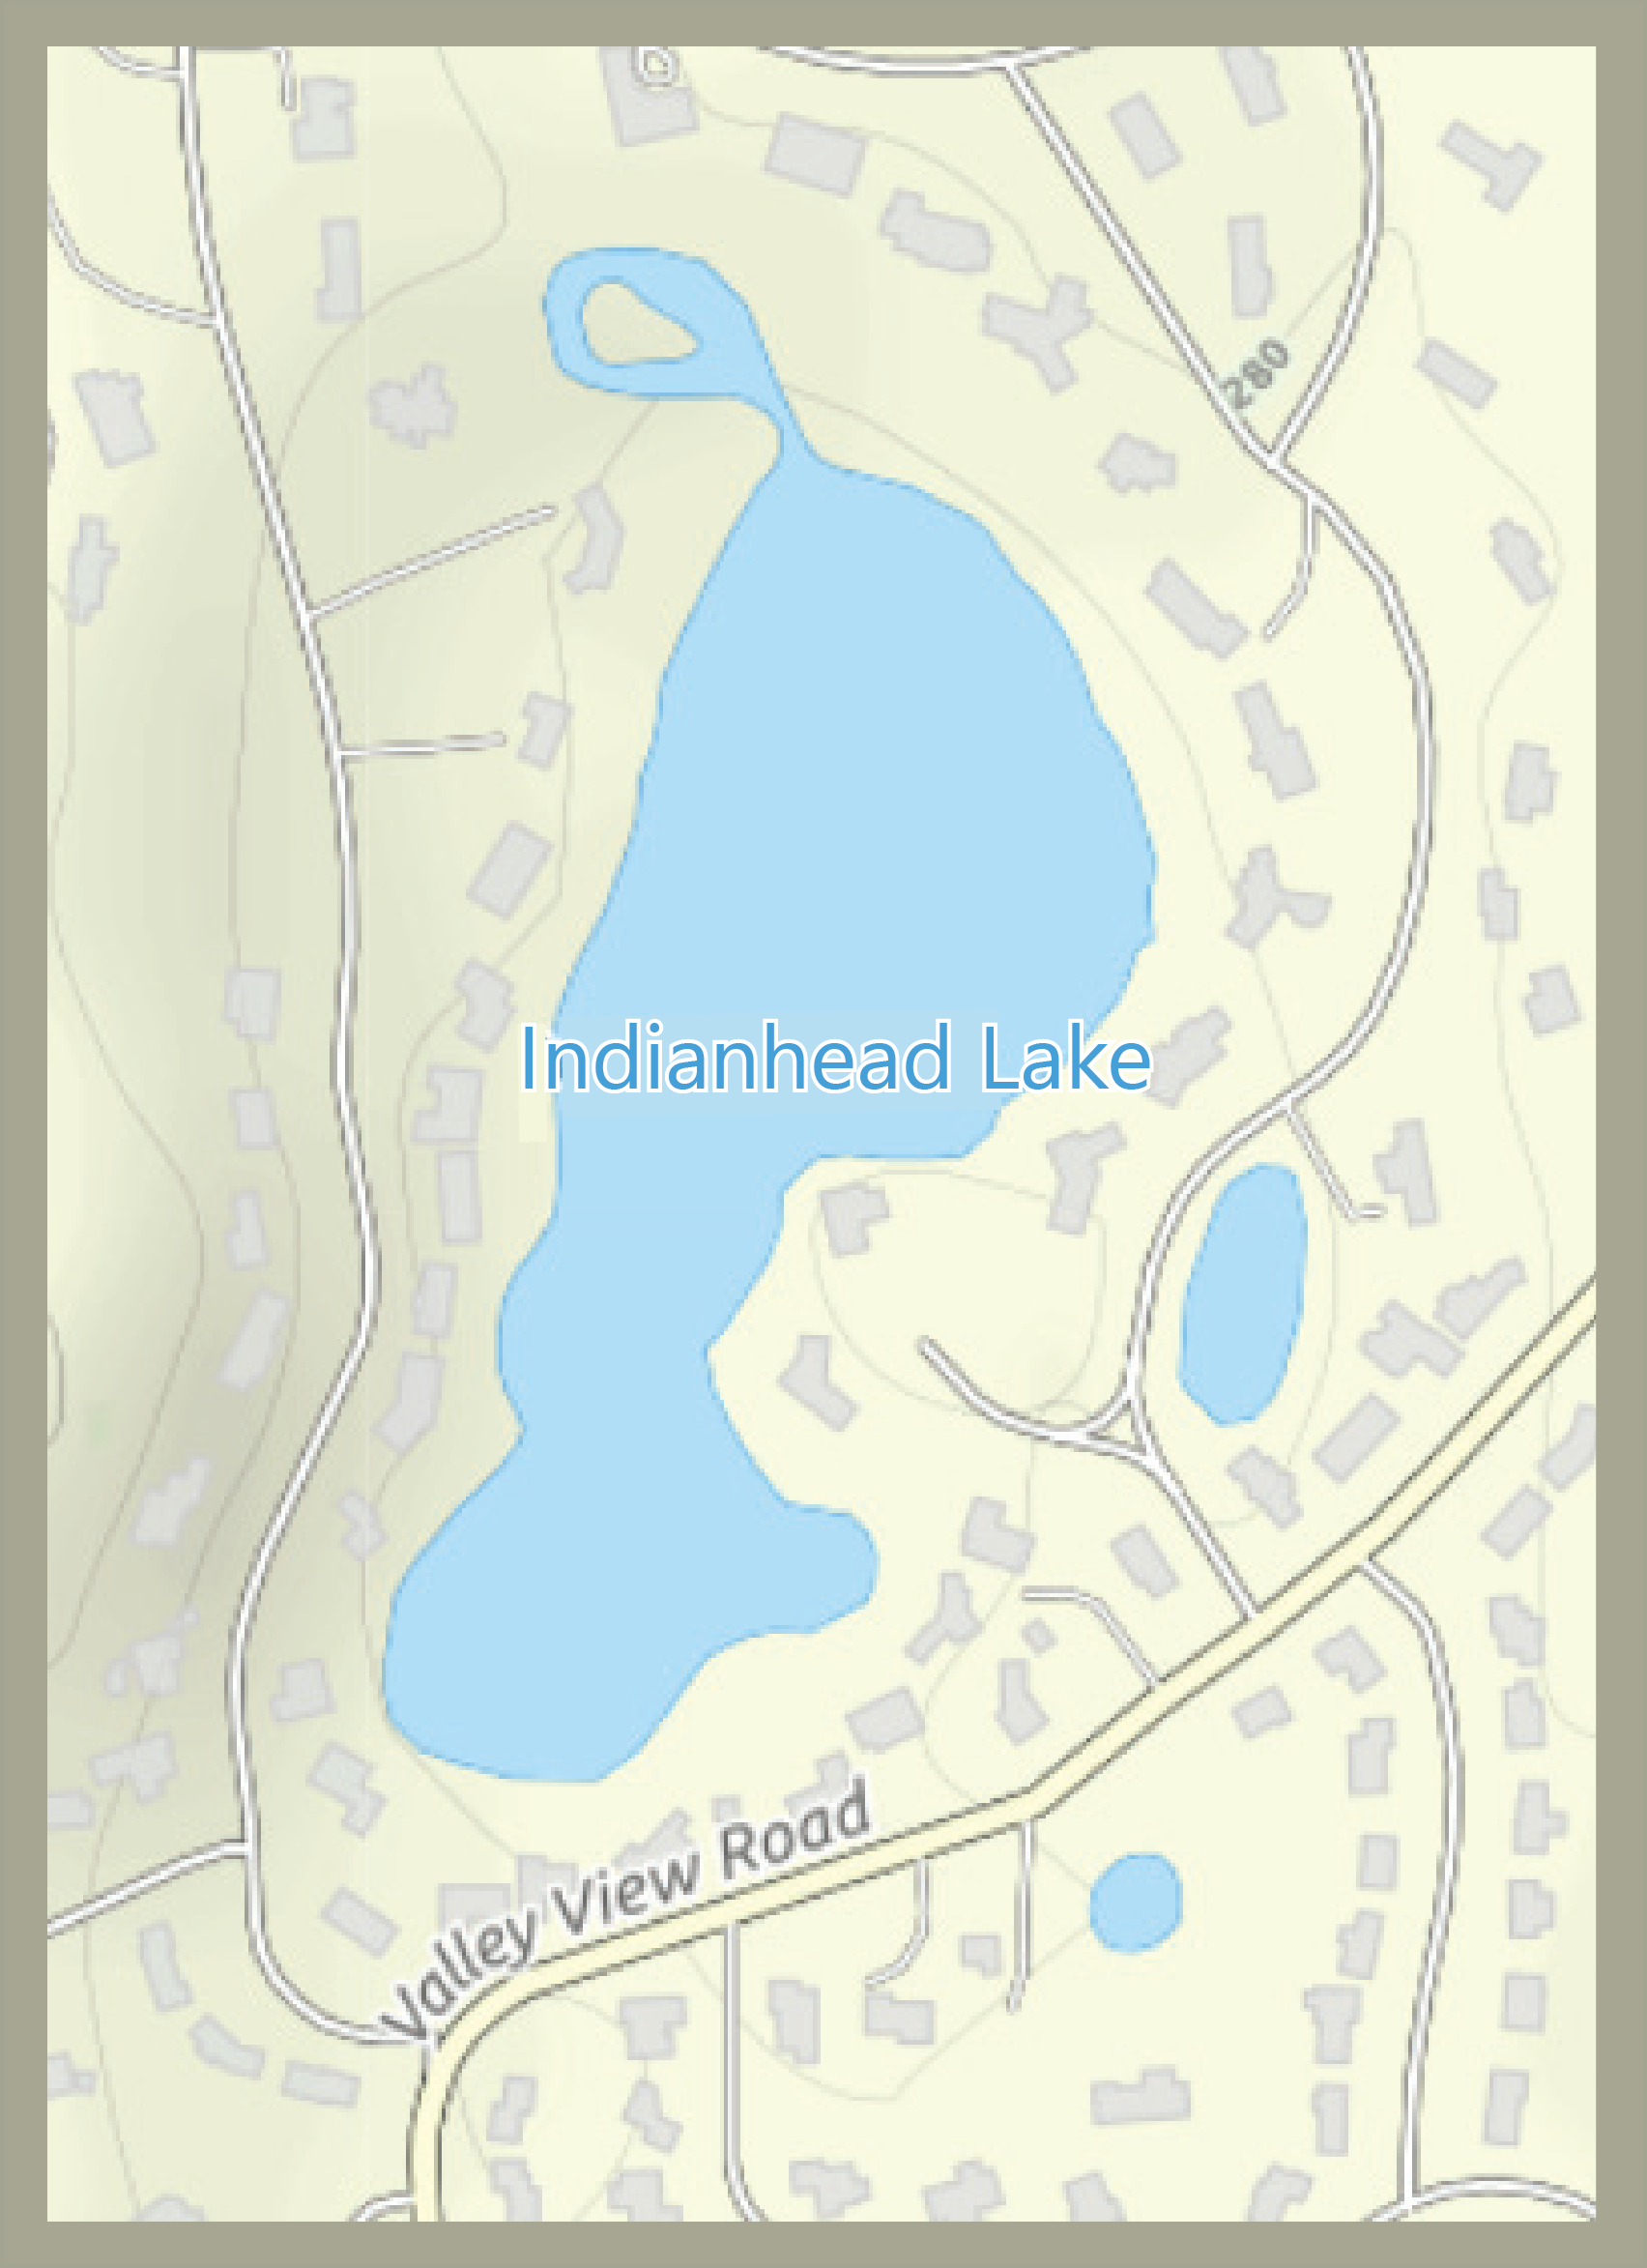 Street map of Indianhead lake area